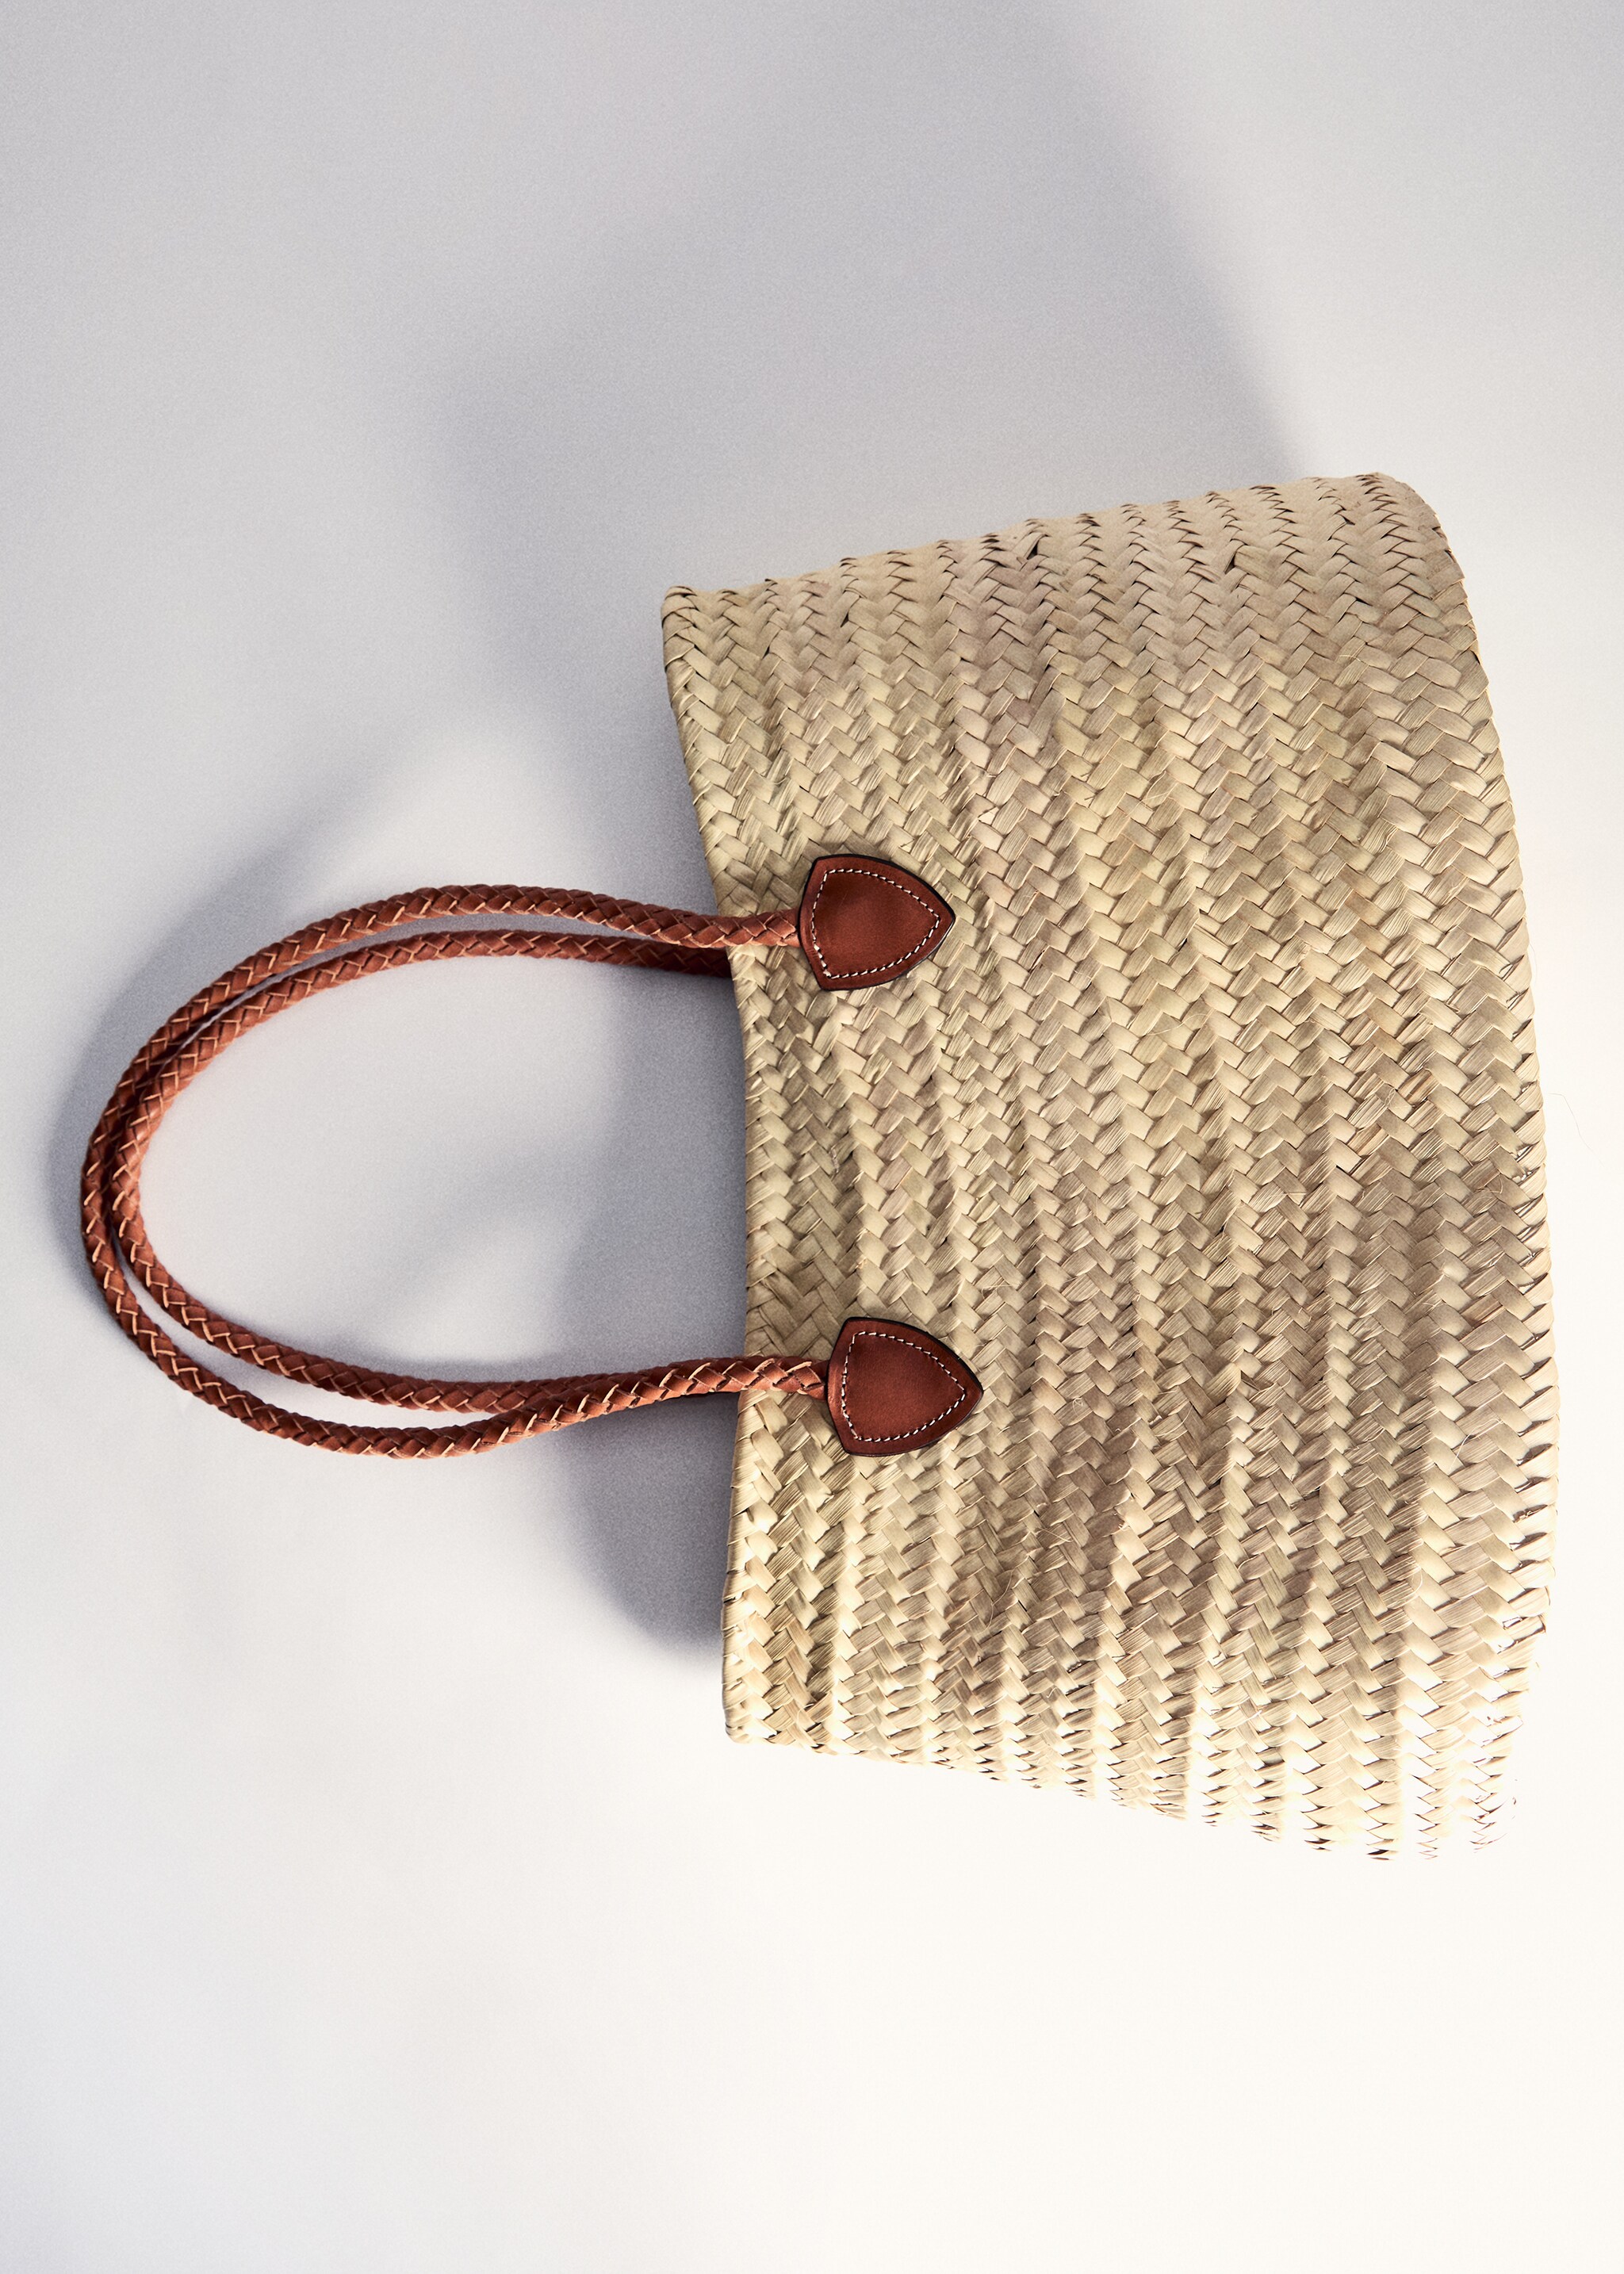 Natural fibre bag with leather handles - Details of the article 5